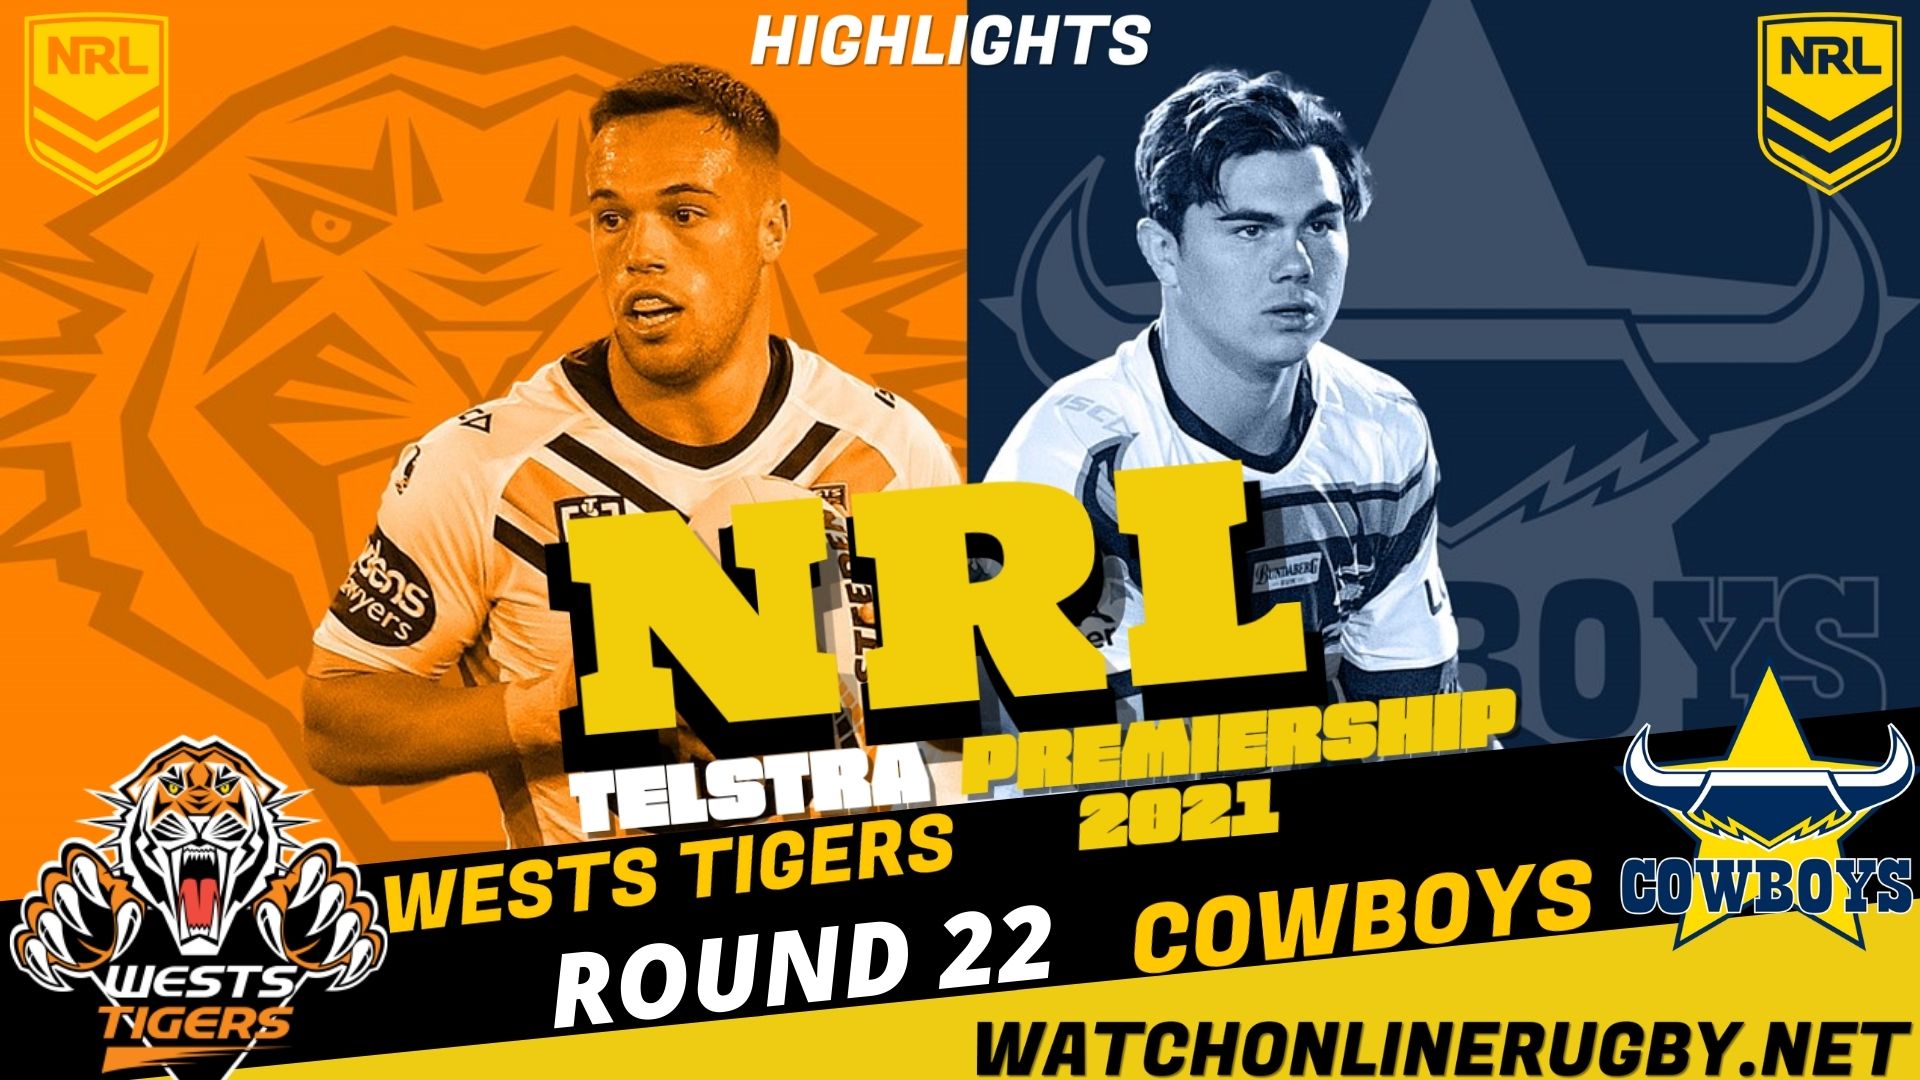 Cowboys Vs Wests Tigers Highlights RD 22 NRL Rugby